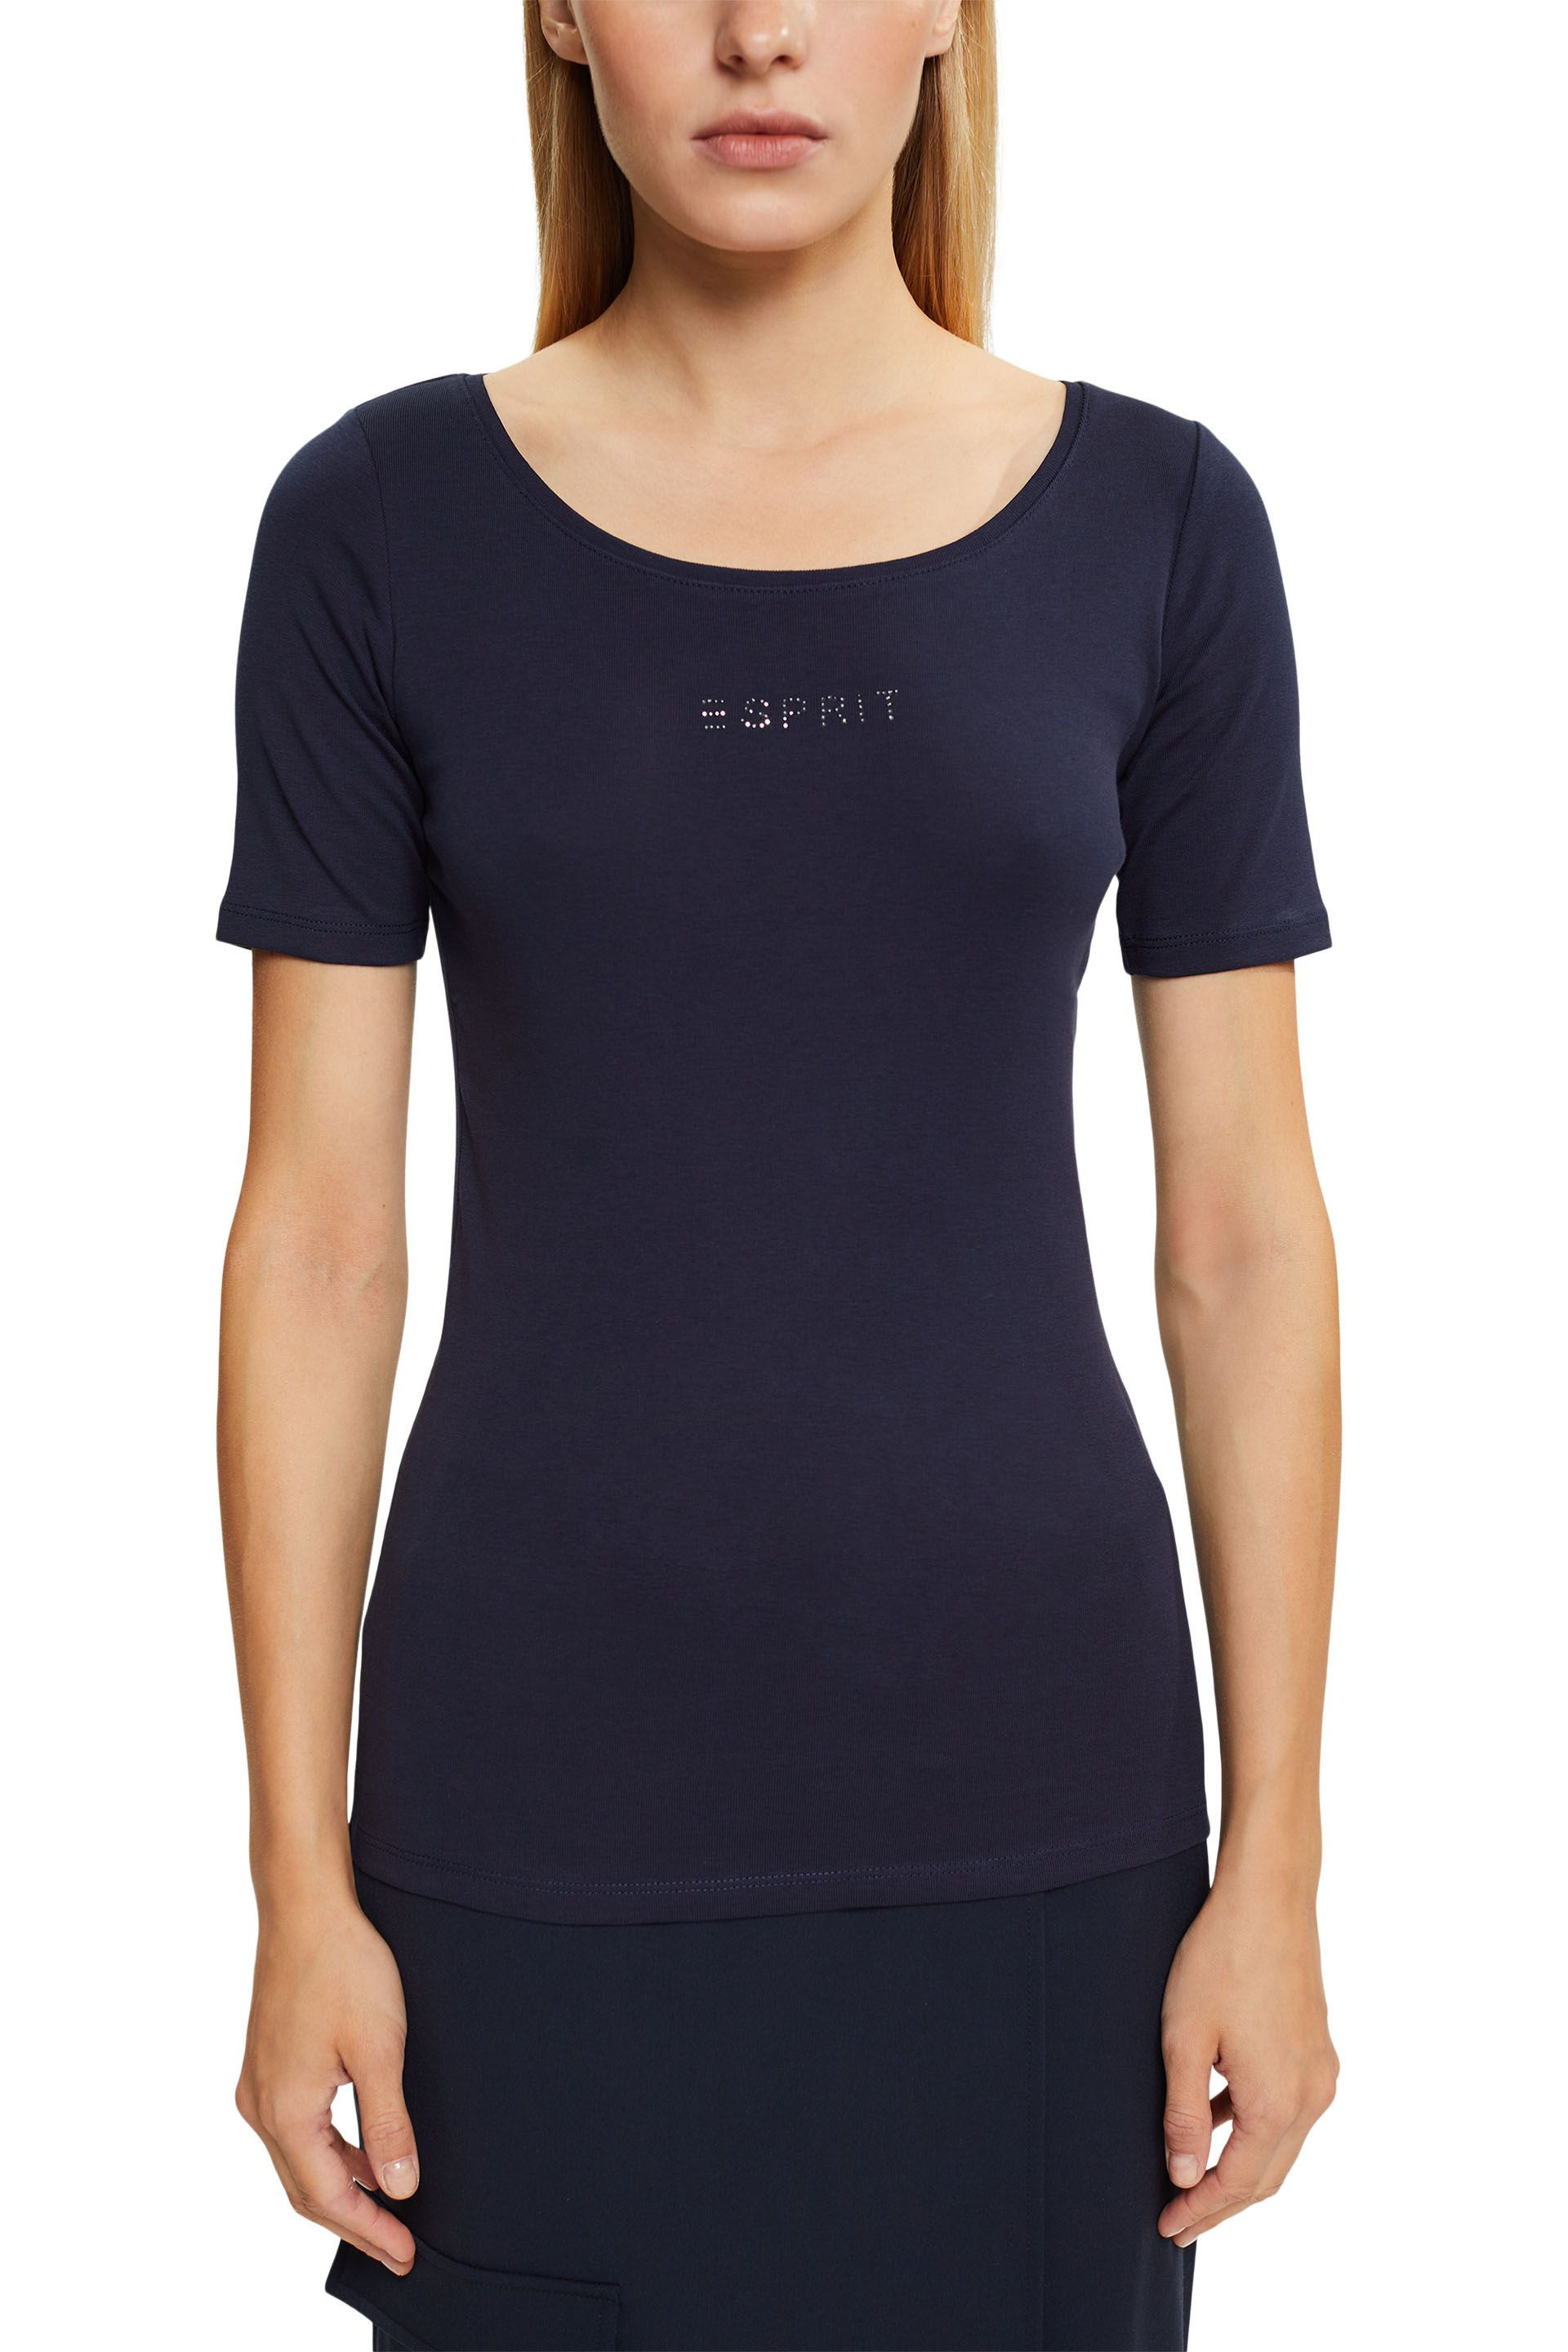 Esprit - T-shirt con logo in cotone, Blu scuro, large image number 1